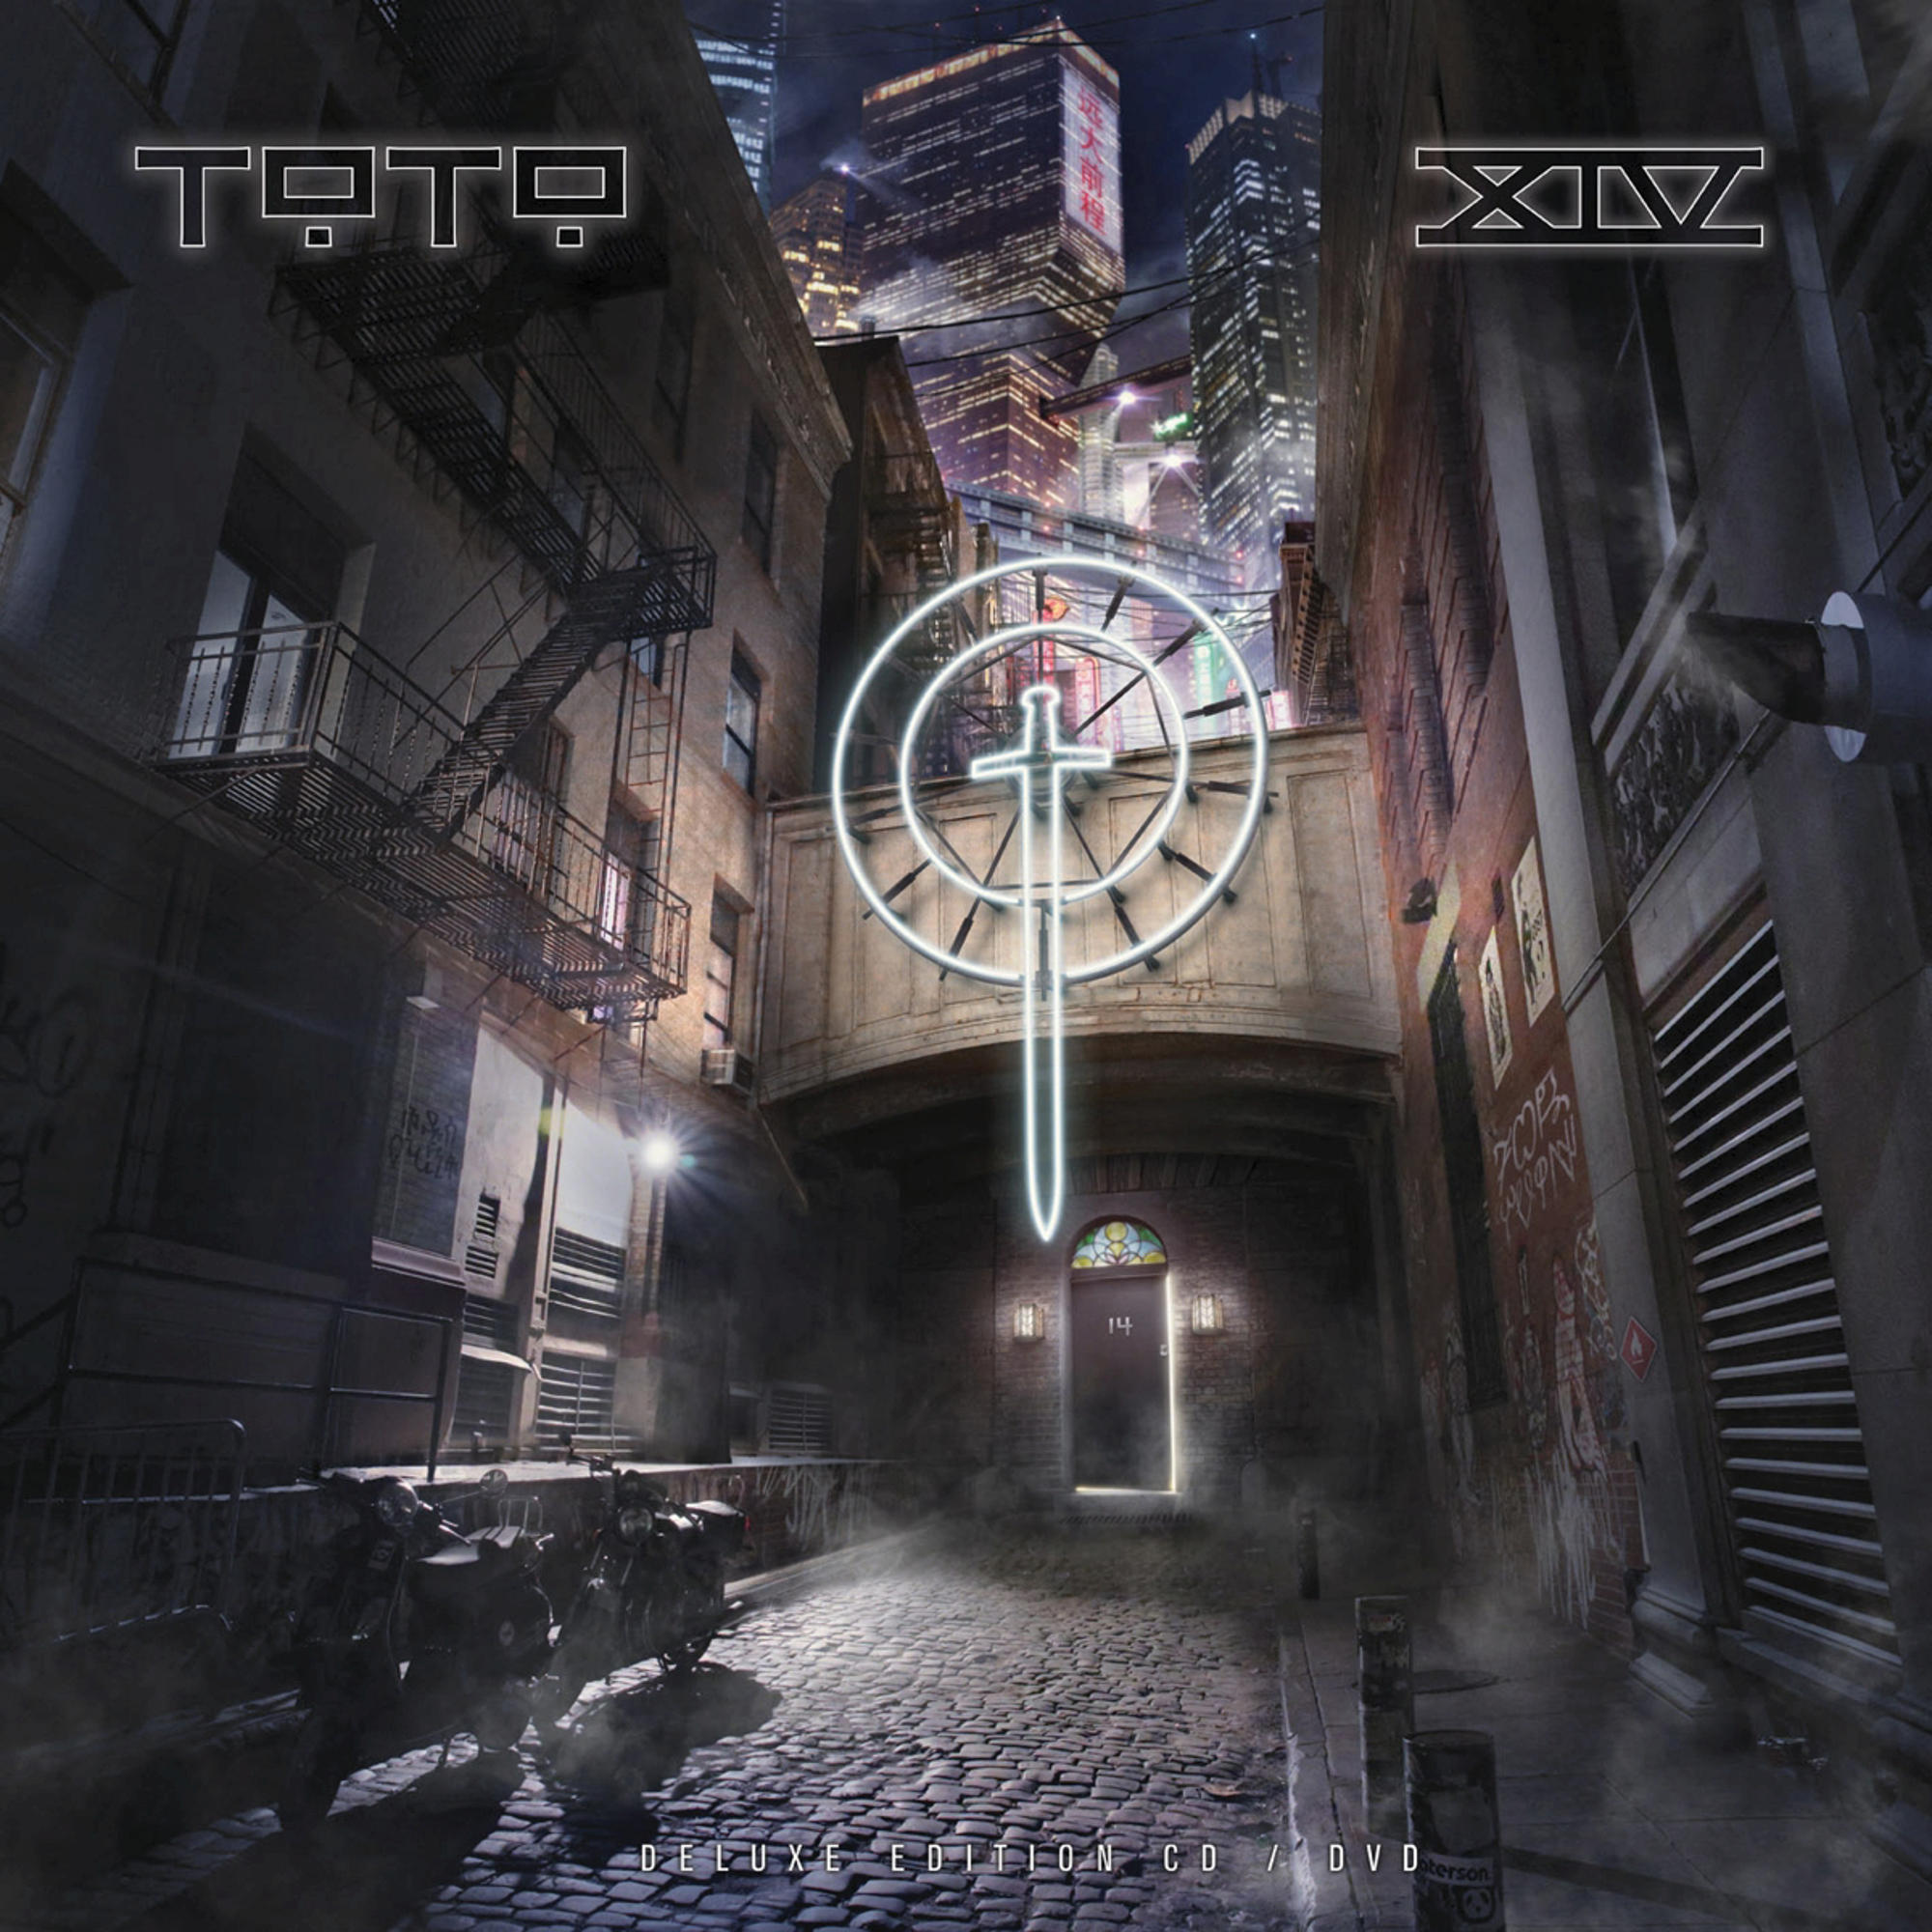 Toto - Toto XIV (Limited Video) (CD - Ecolbook Edition) DVD 